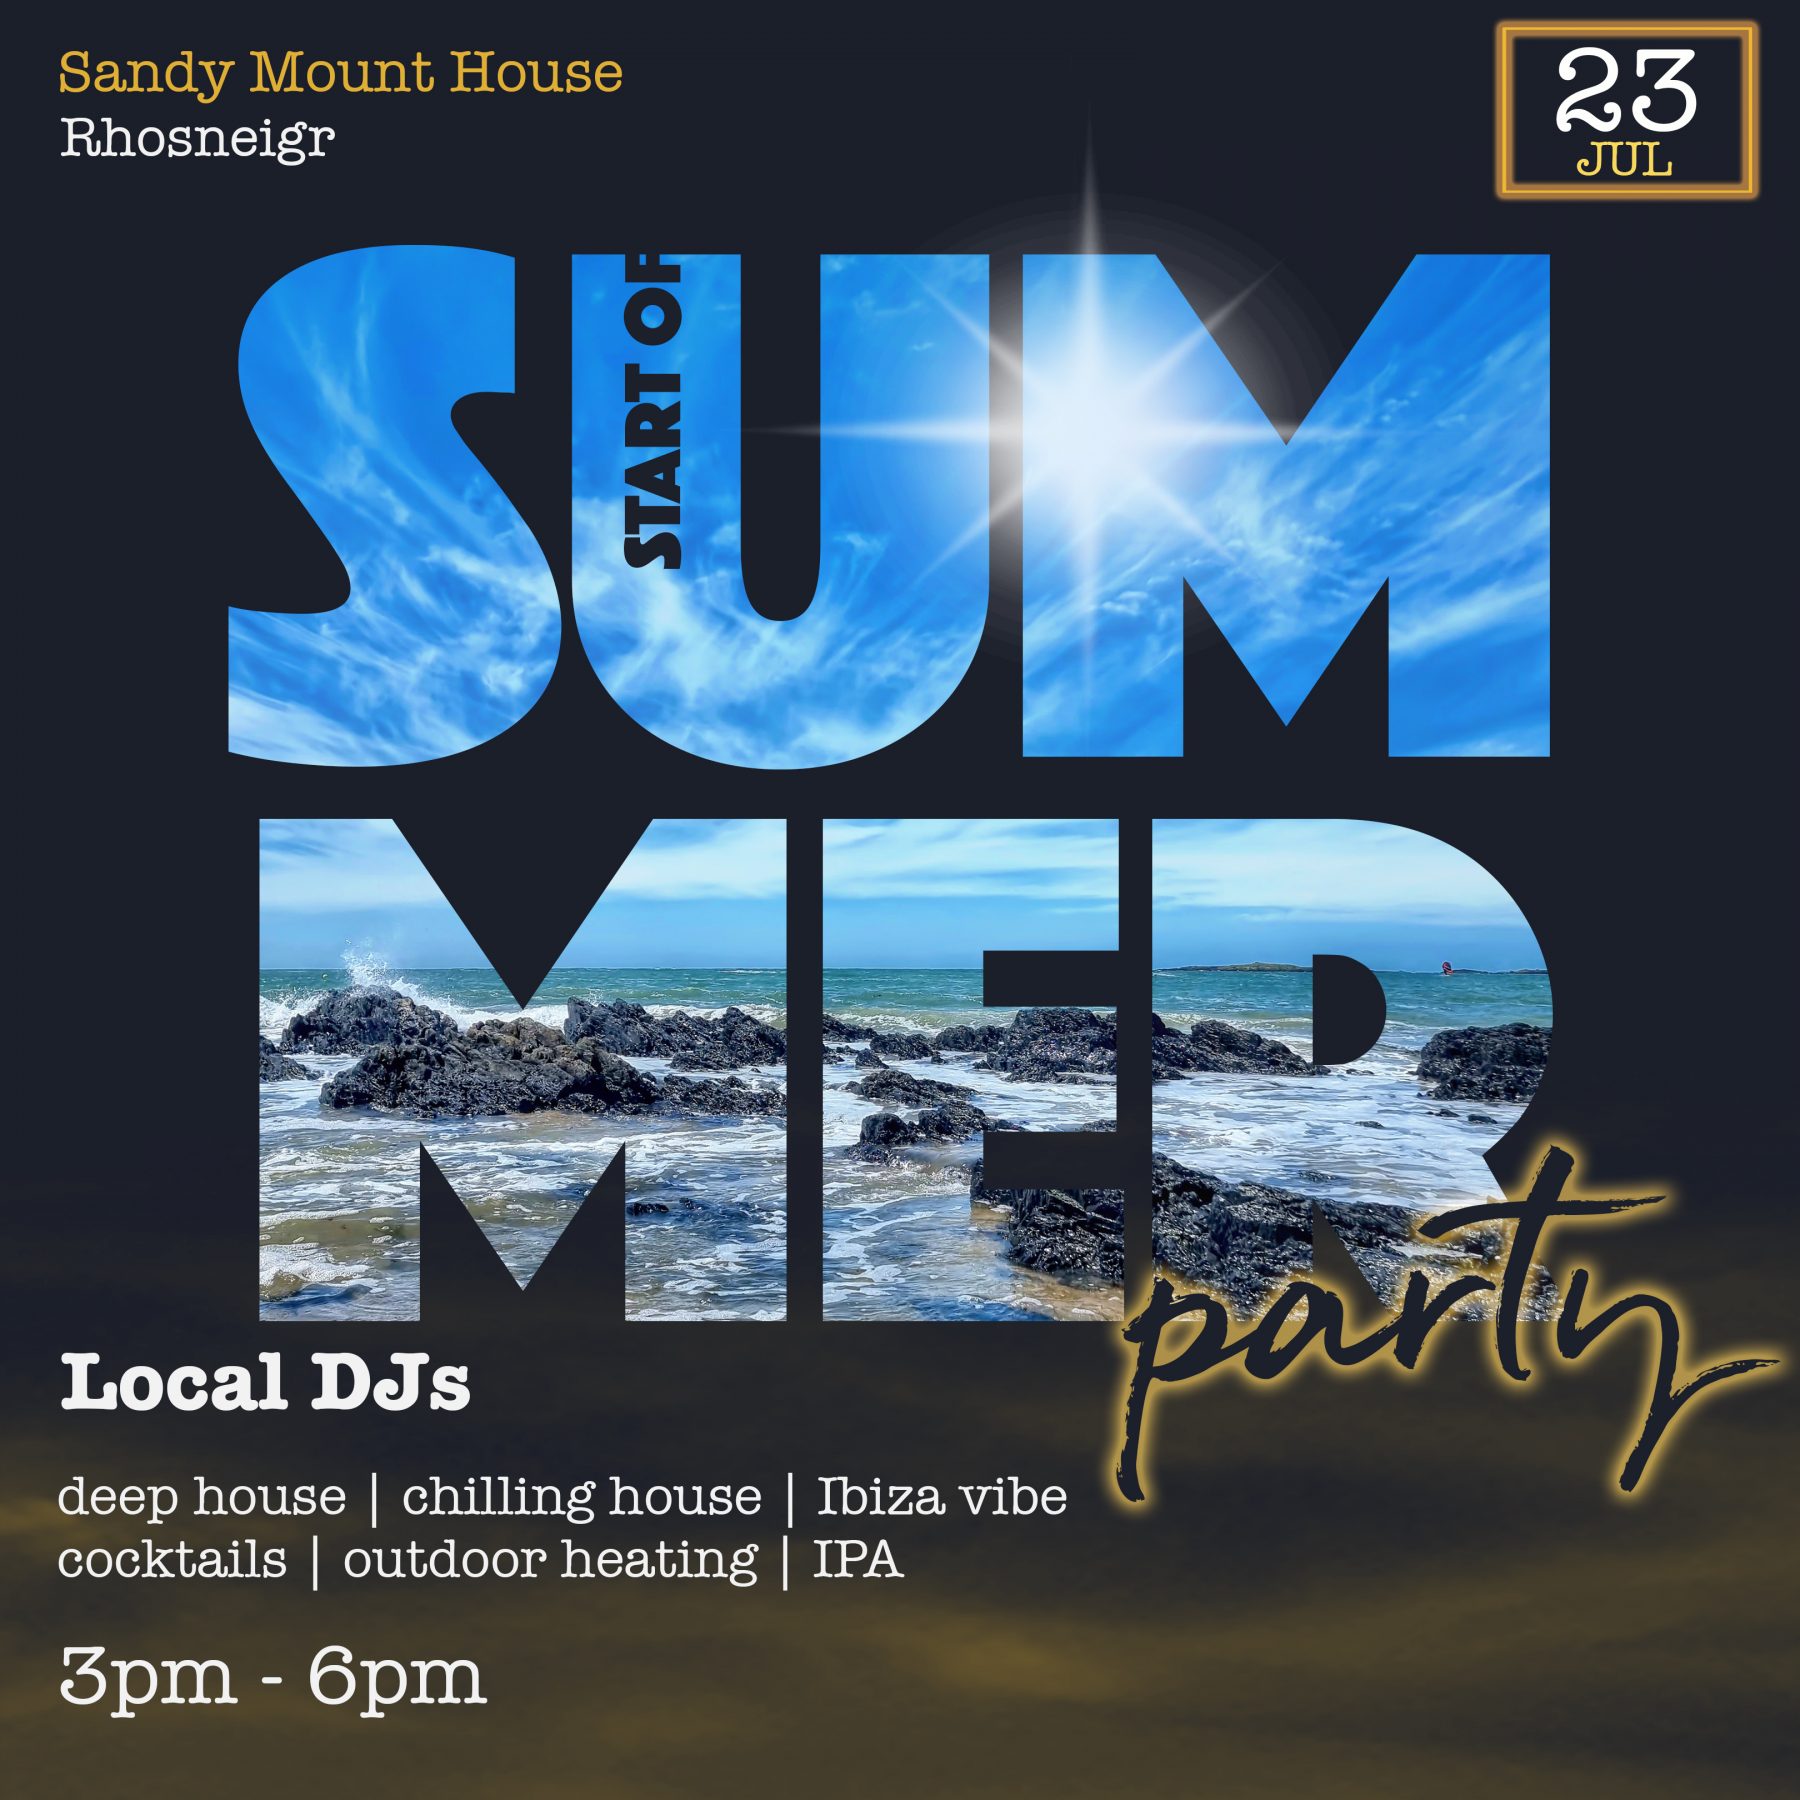 The Summer Soundtrack at Sandy Mount House